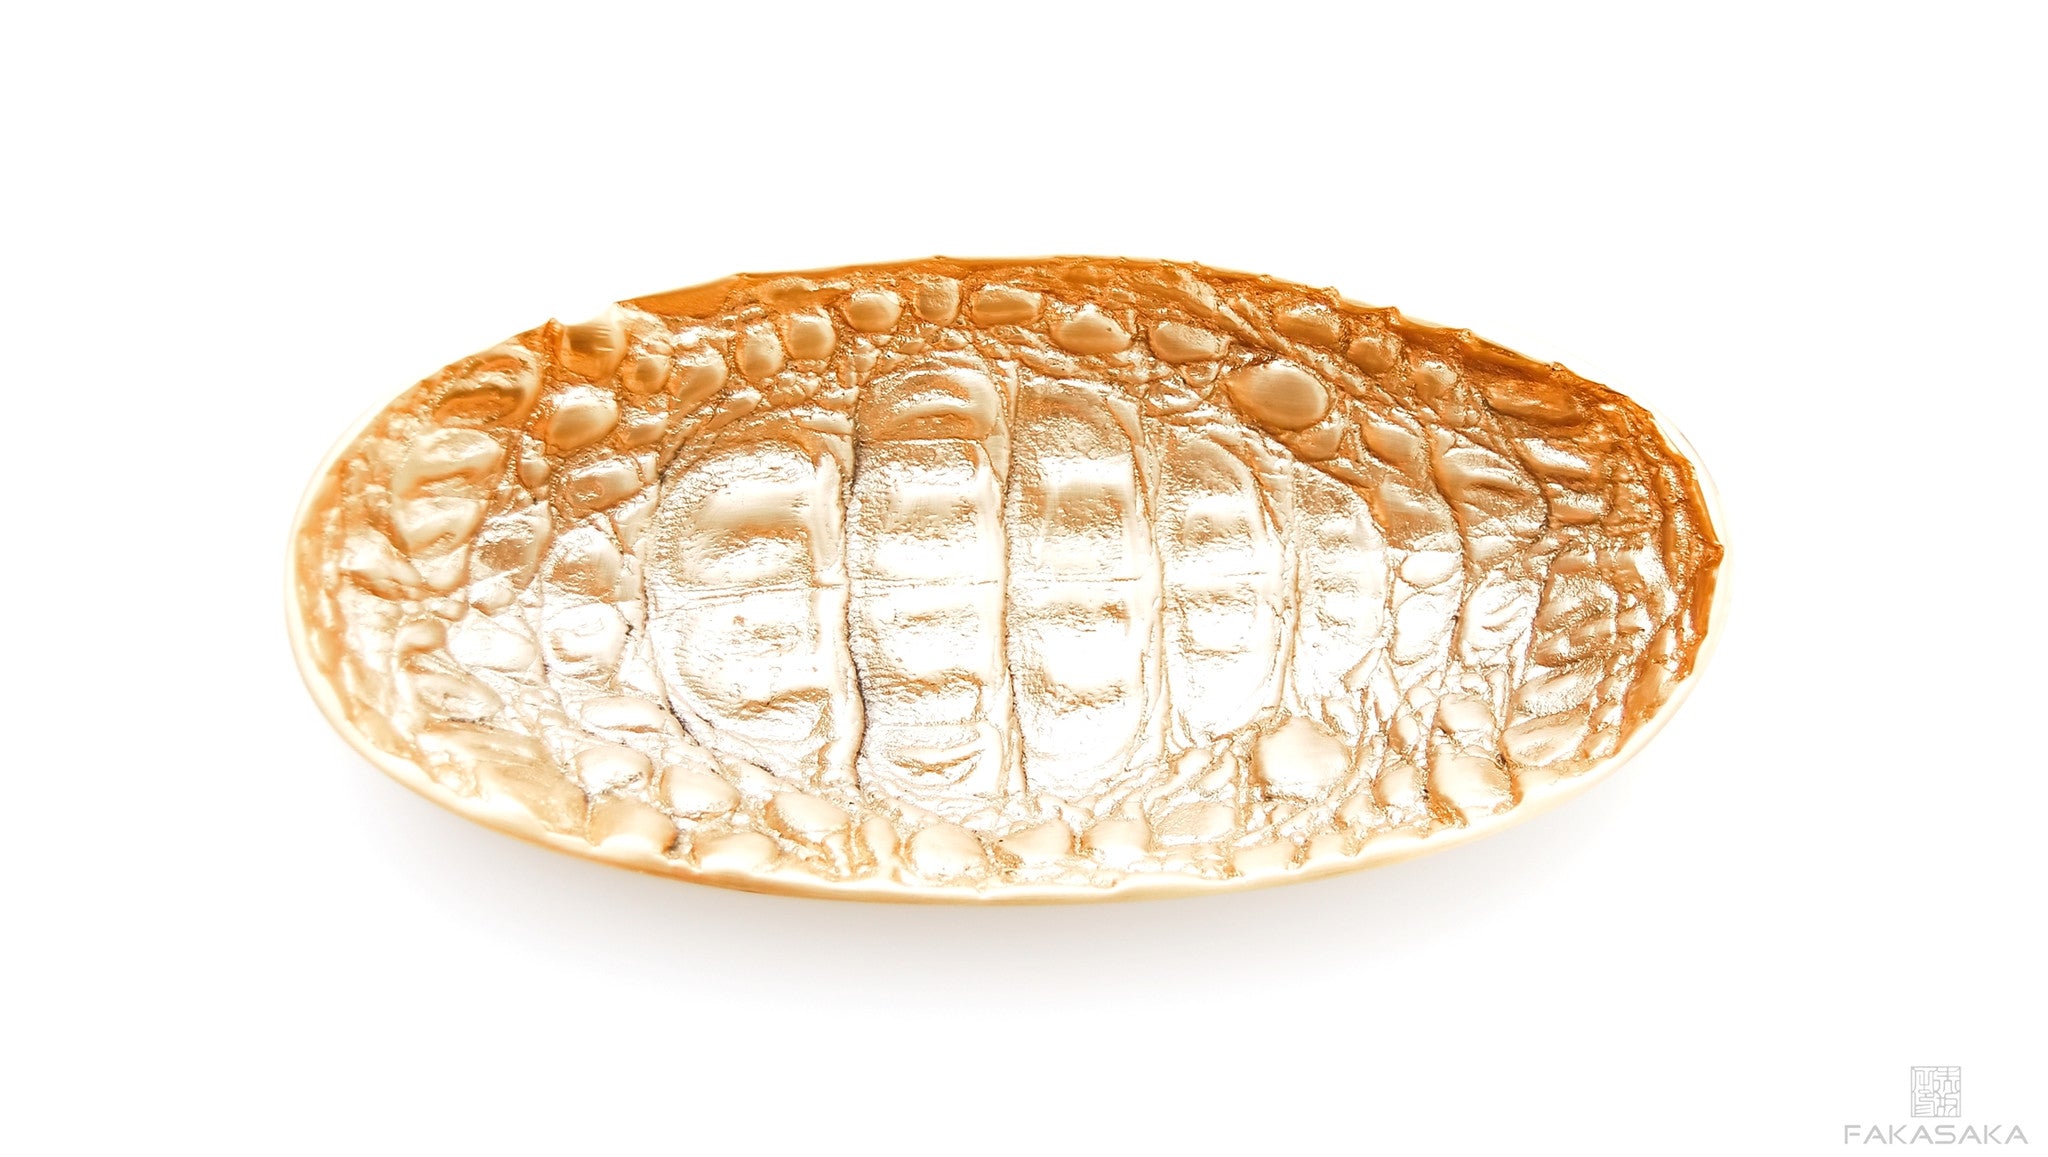 POLLY JEAN<br><br>SMALL TRAY / SMALL BOWL / ASHTRAY / CARD HOLDER / PEN HOLDER<br><br> GOLD PLATED BRONZE